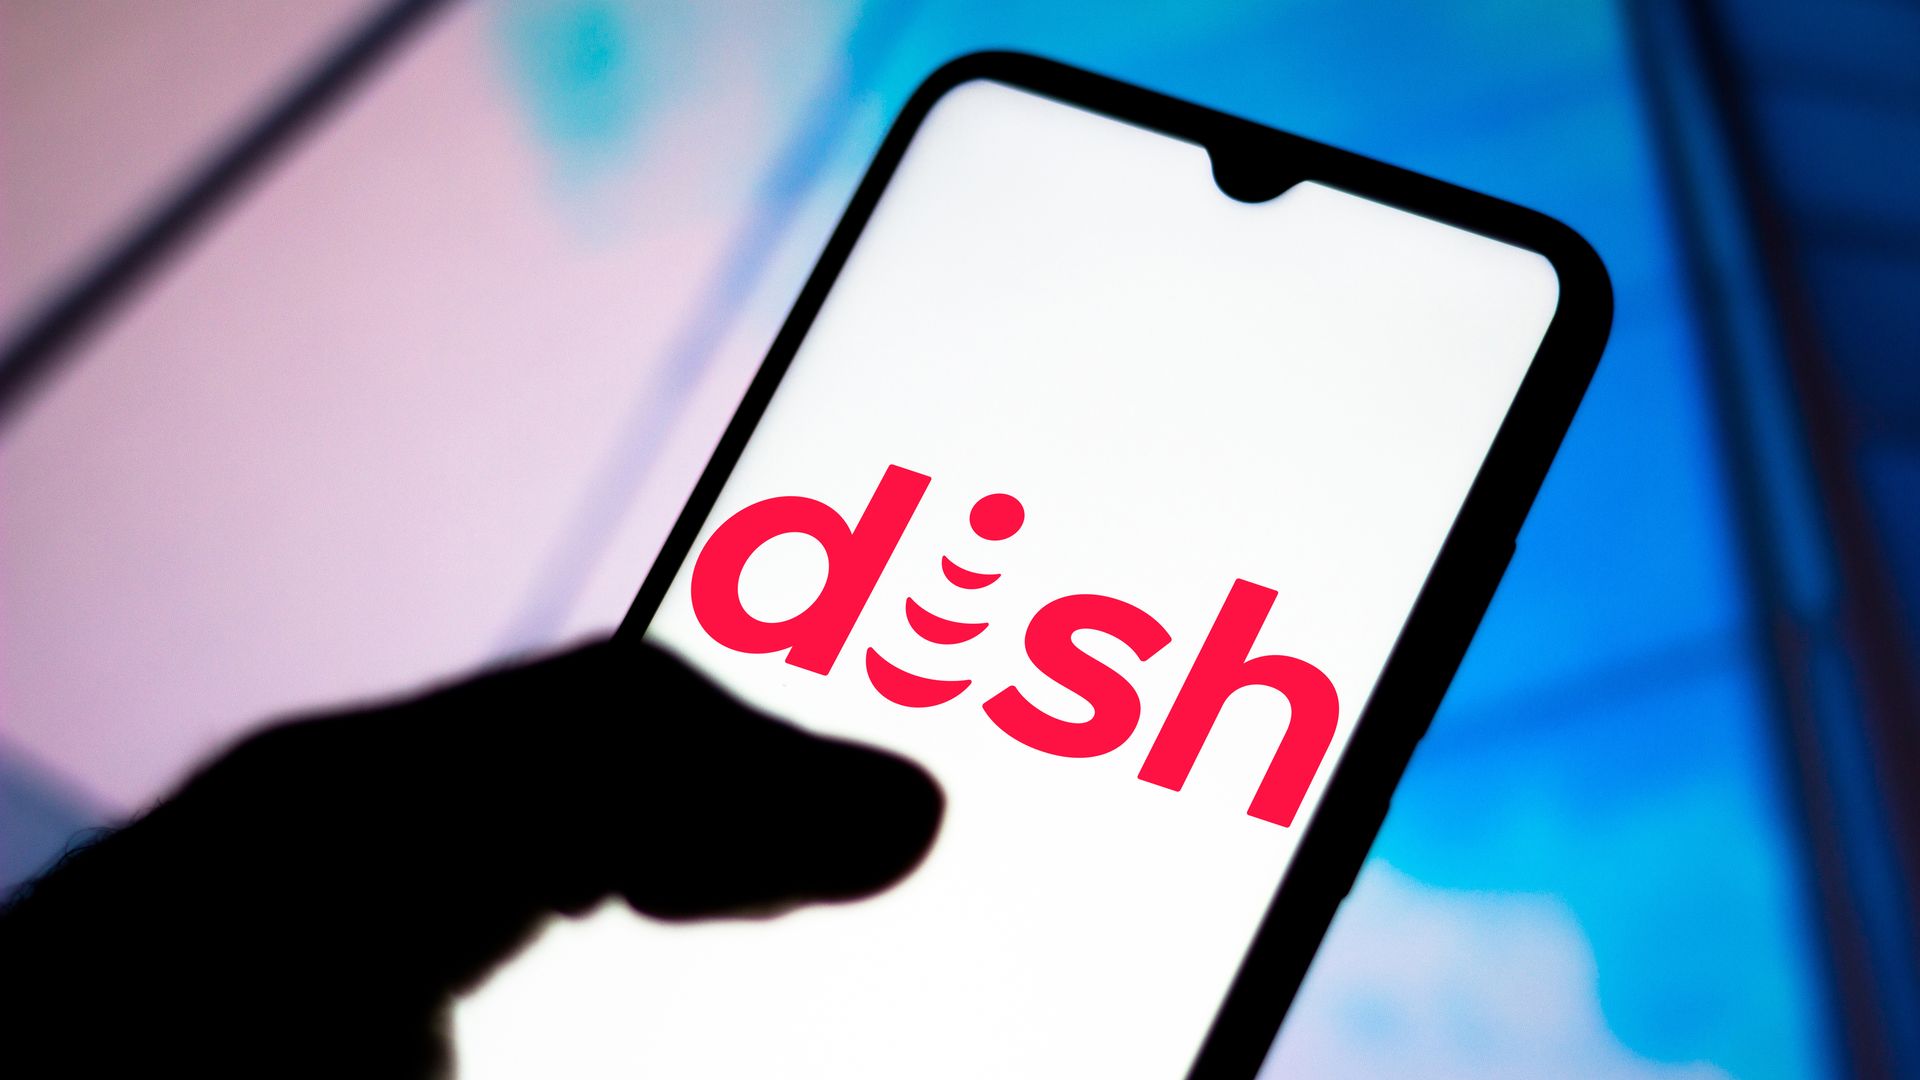 Image of a person holding a phone with the "Dish" logo on the screen.